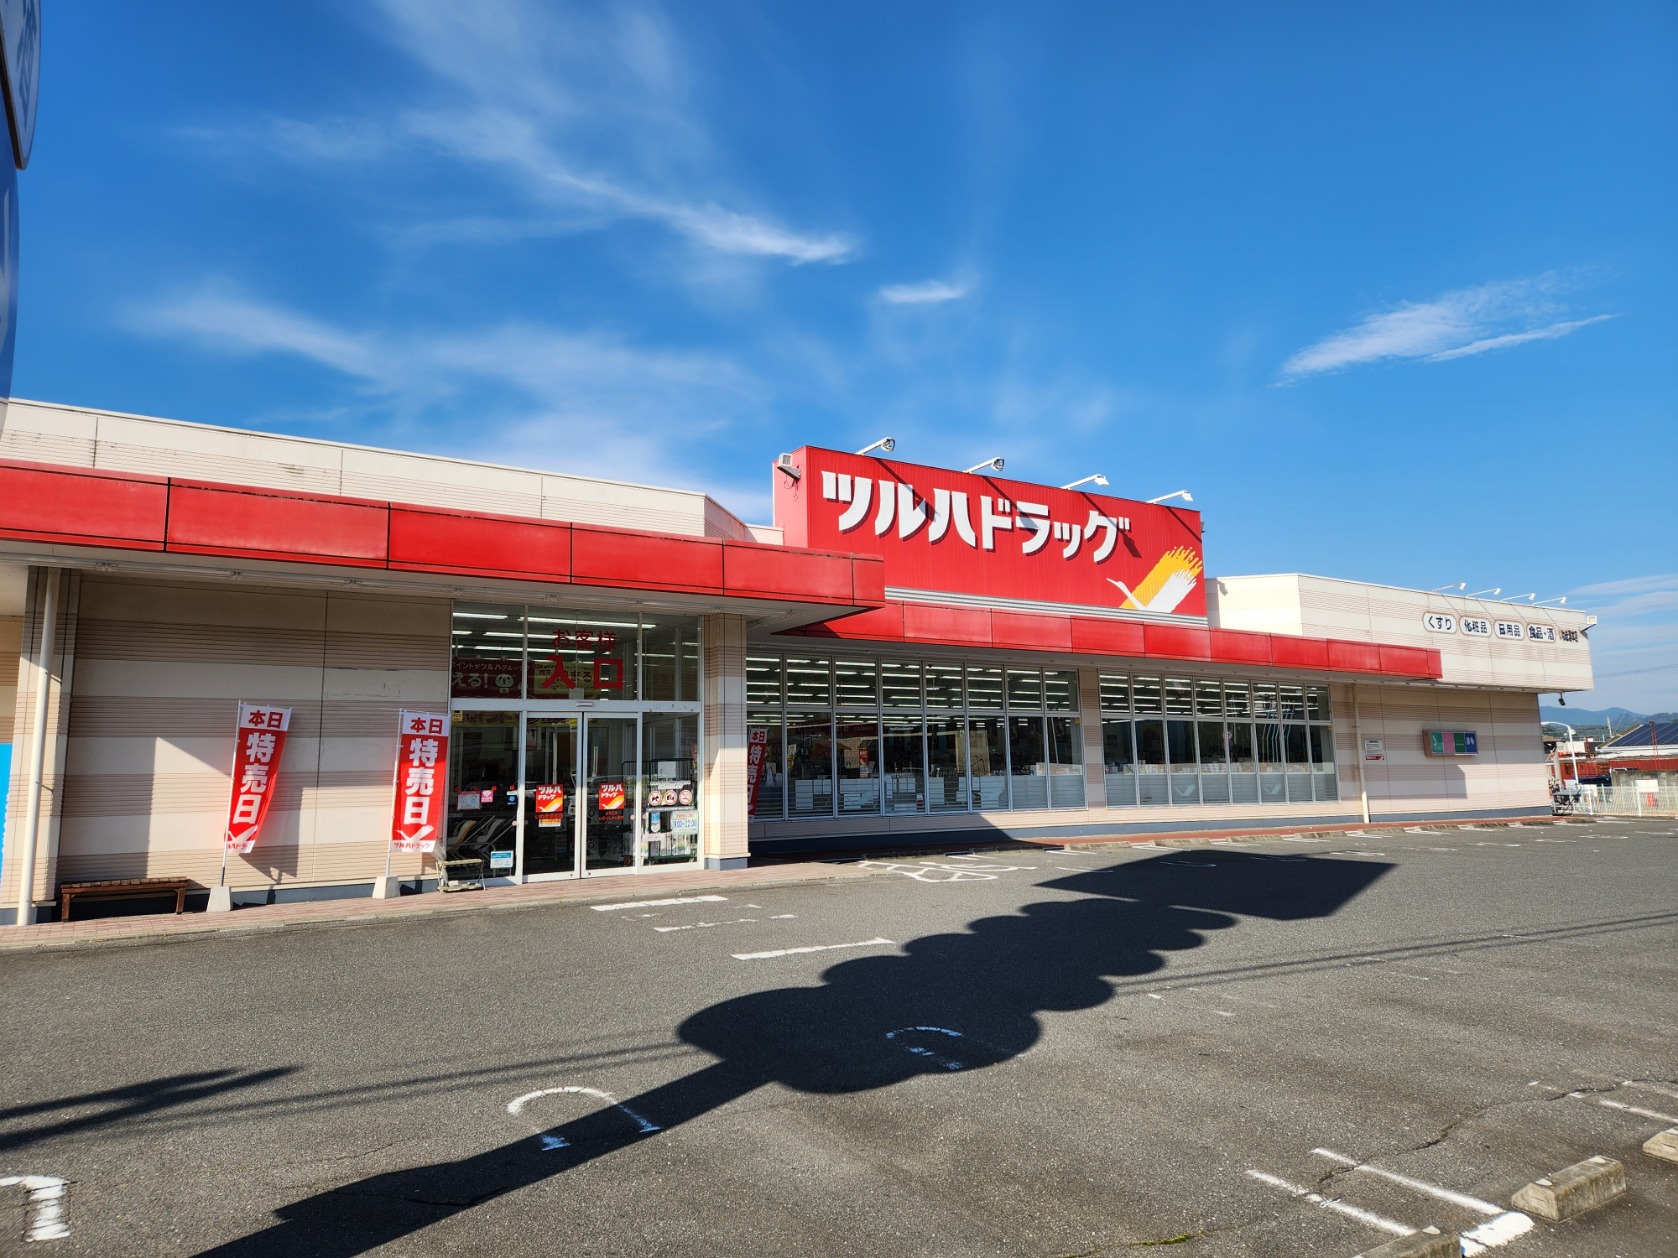 Images ツルハドラッグ いわき湯本店